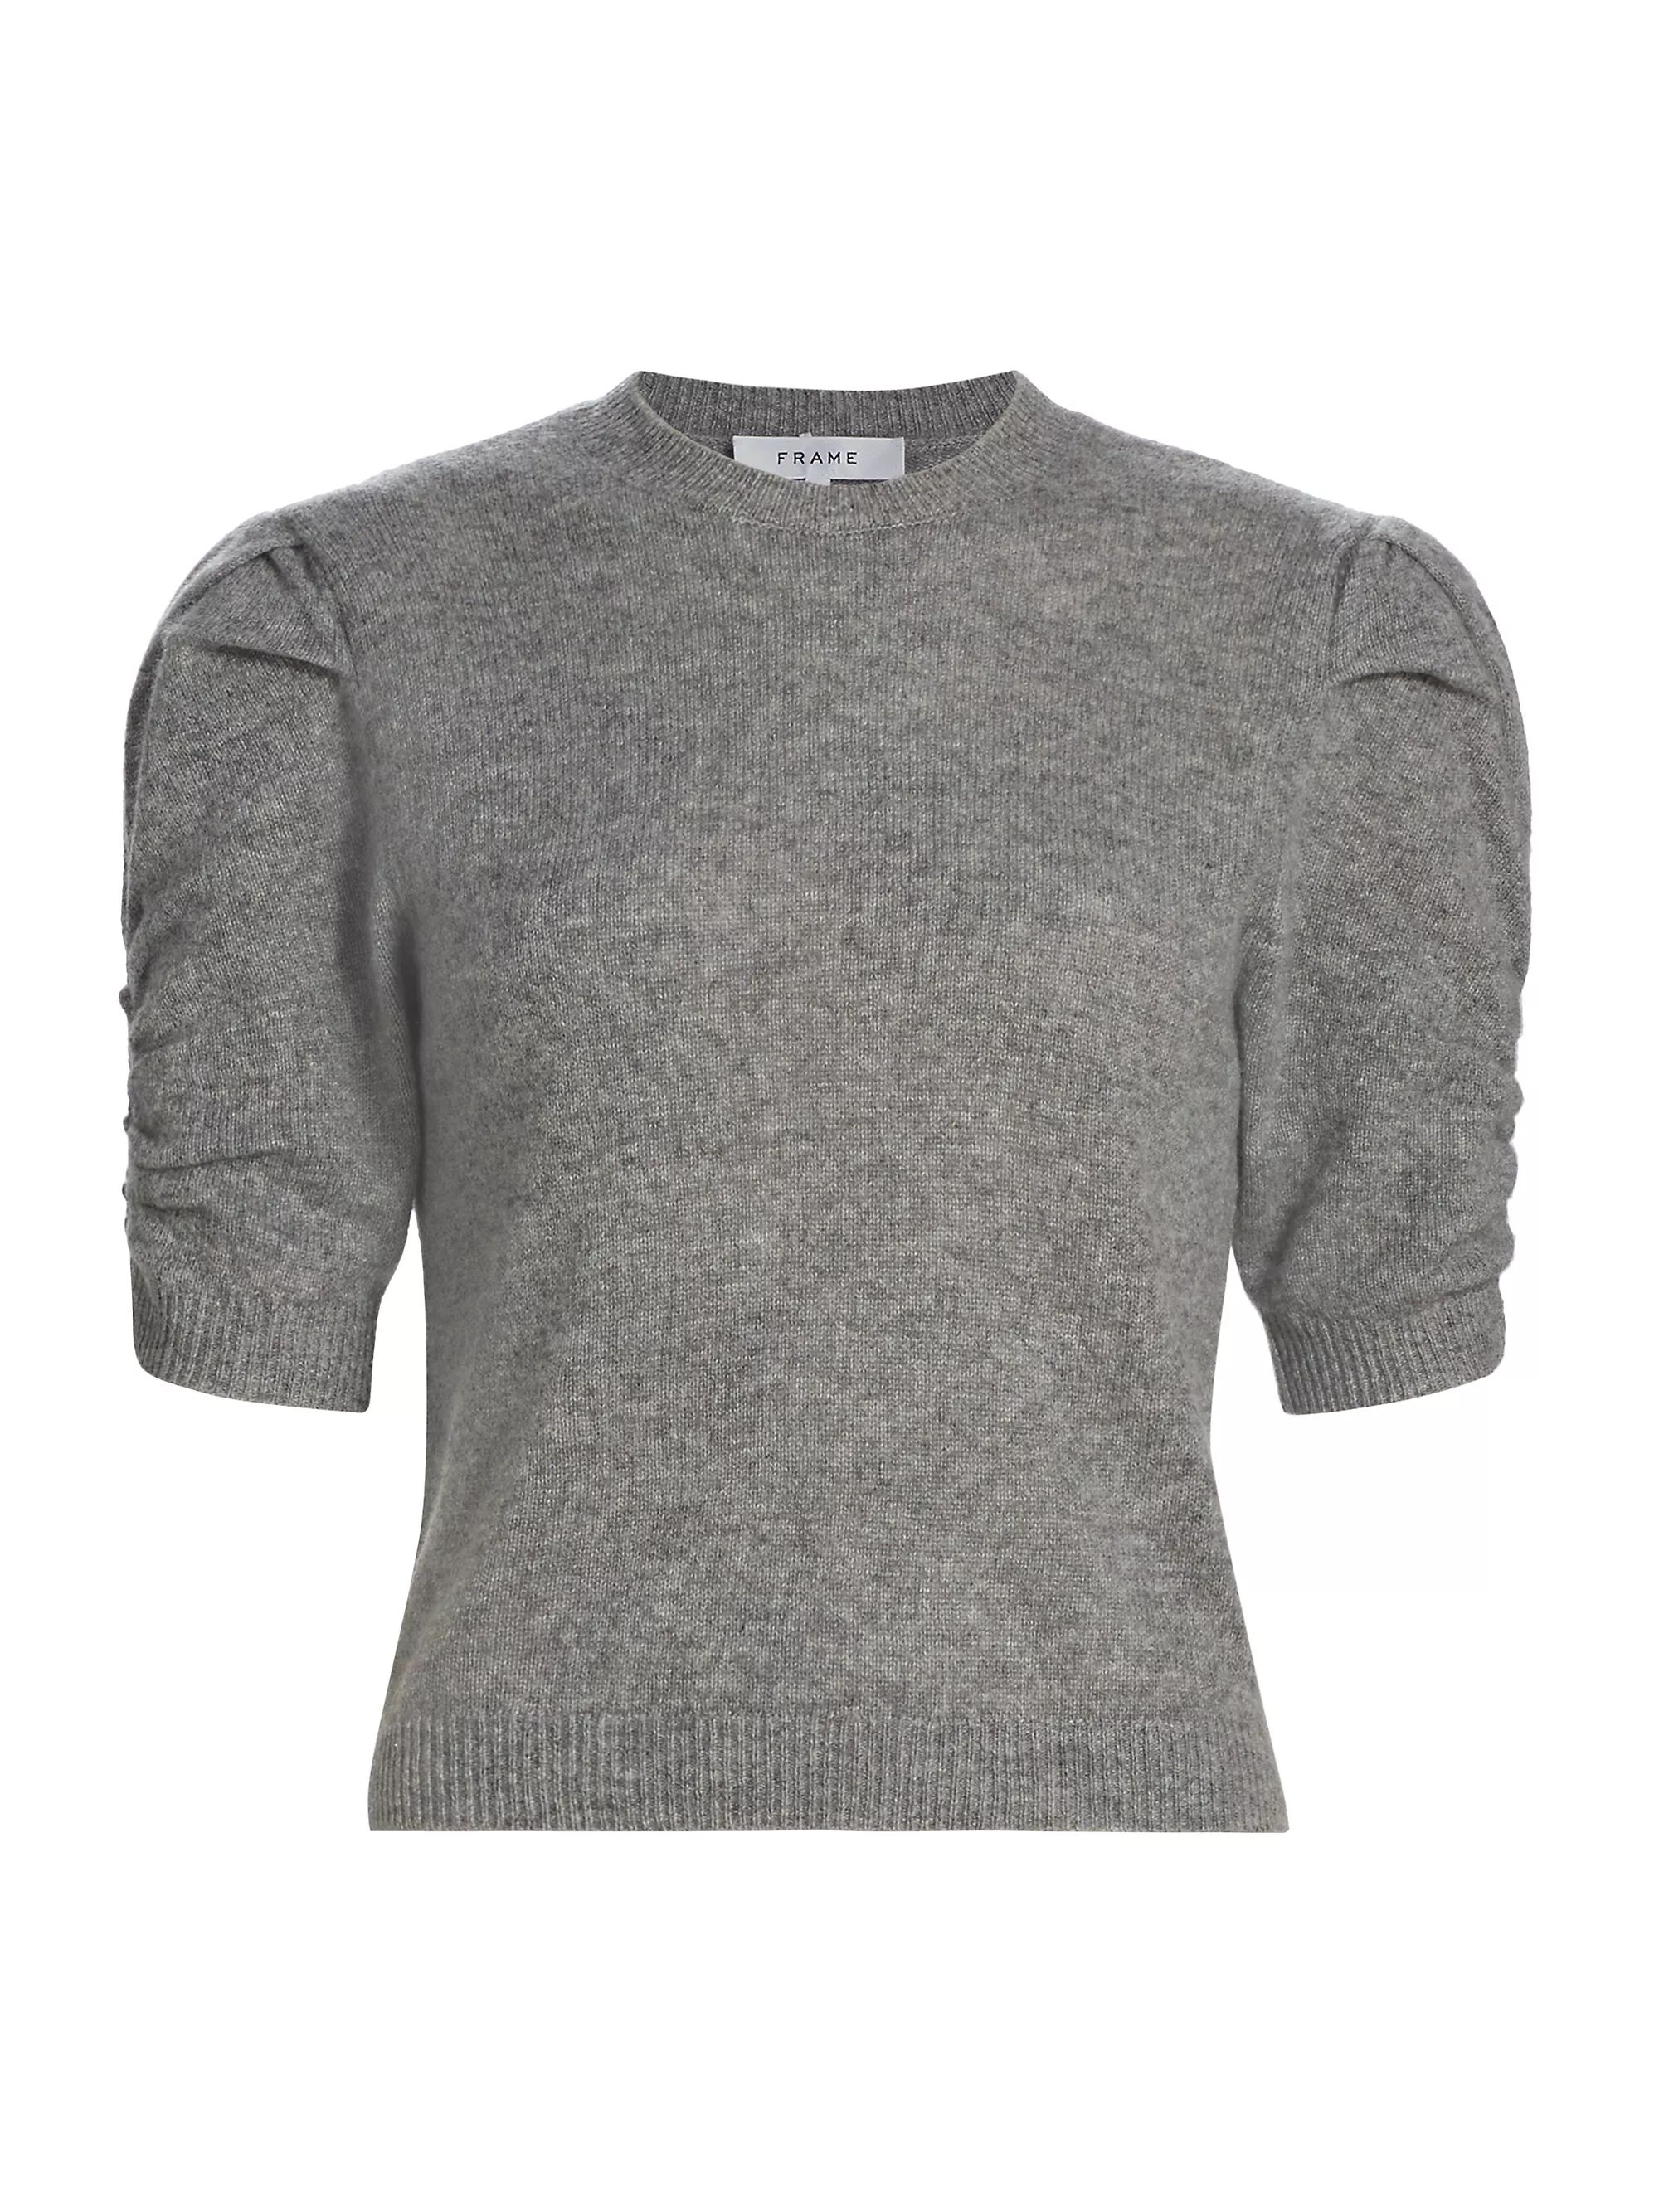 Shop Frame Ruched Sleeve Cashmere-Wool Sweater | Saks Fifth Avenue | Saks Fifth Avenue